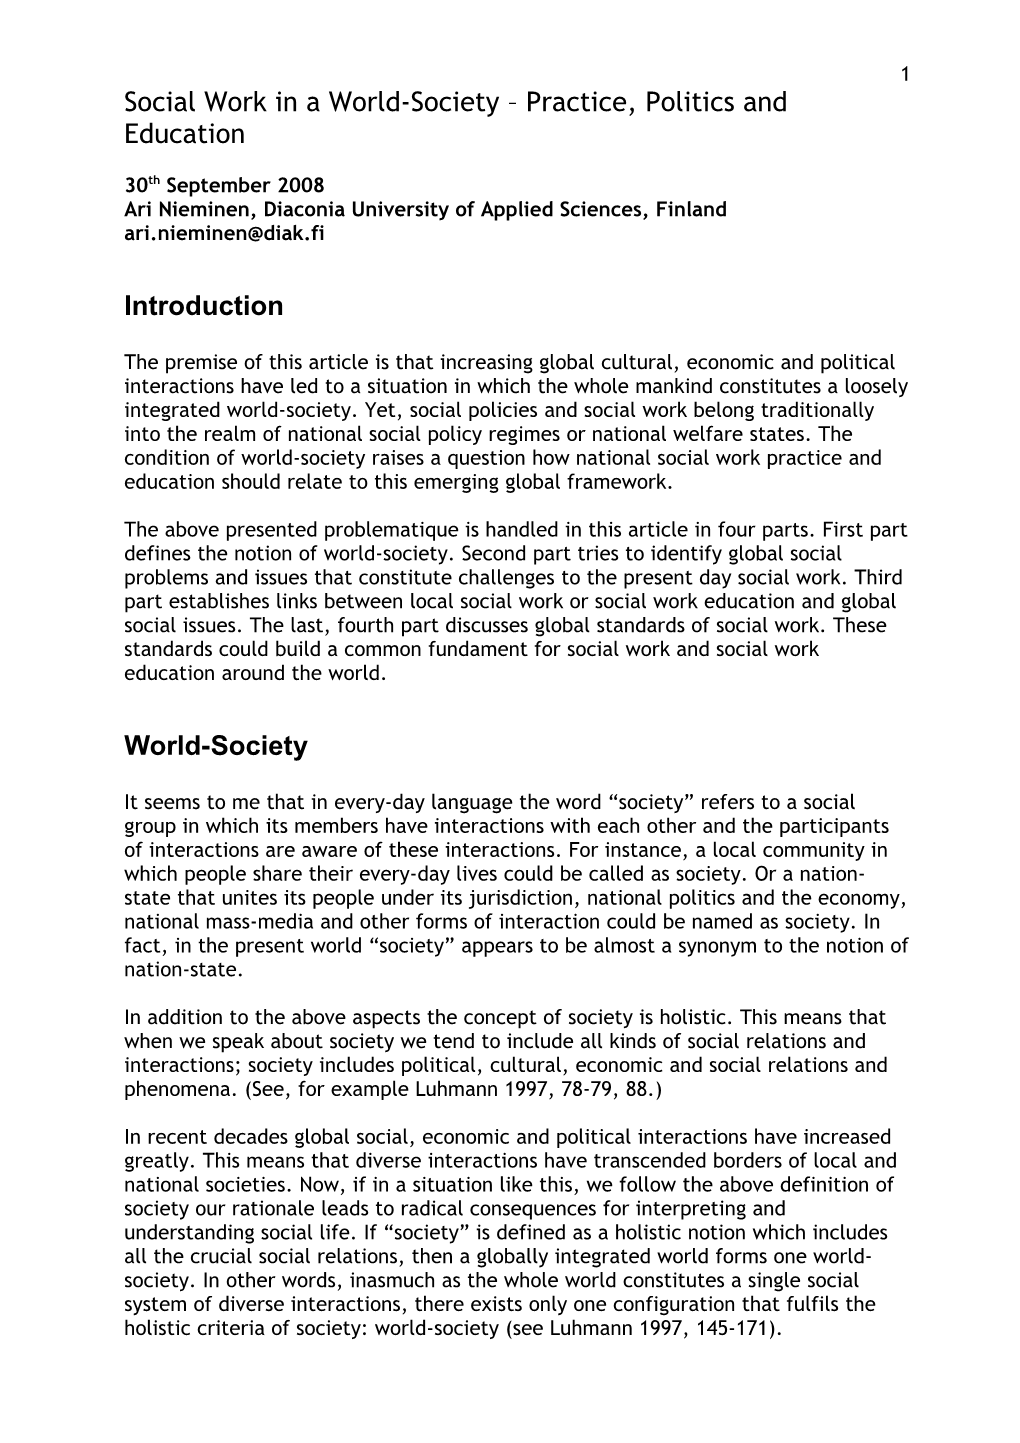 Social Work in a World-Society Practice, Politics and Education